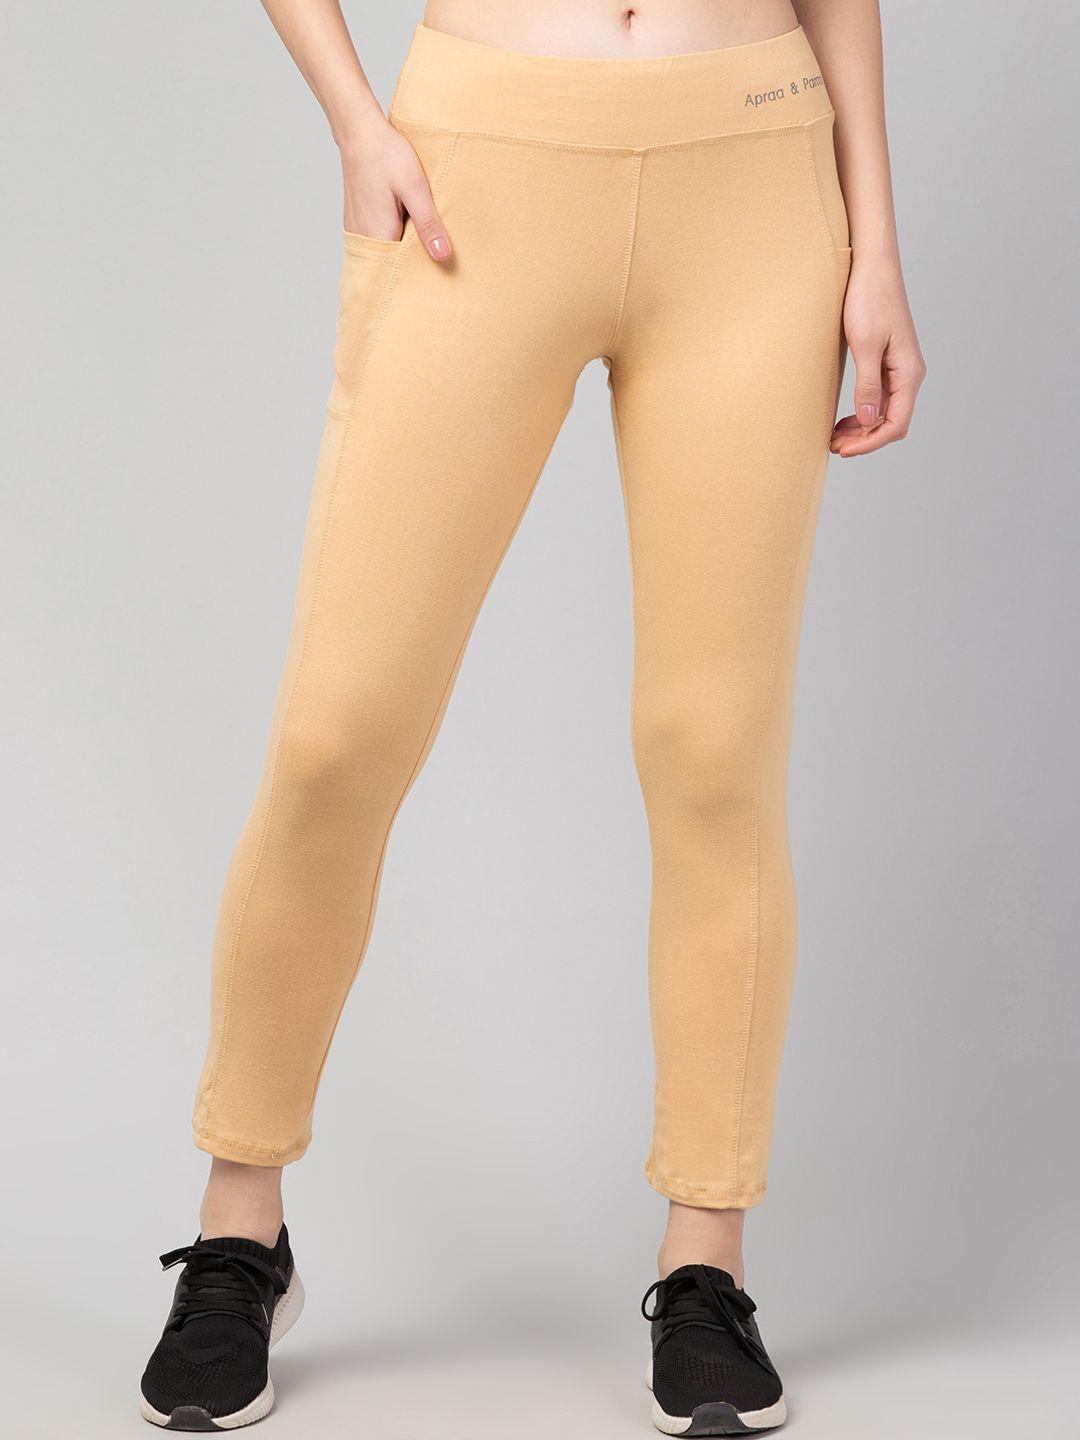 apraa & parma slim-fit ankle-length tights